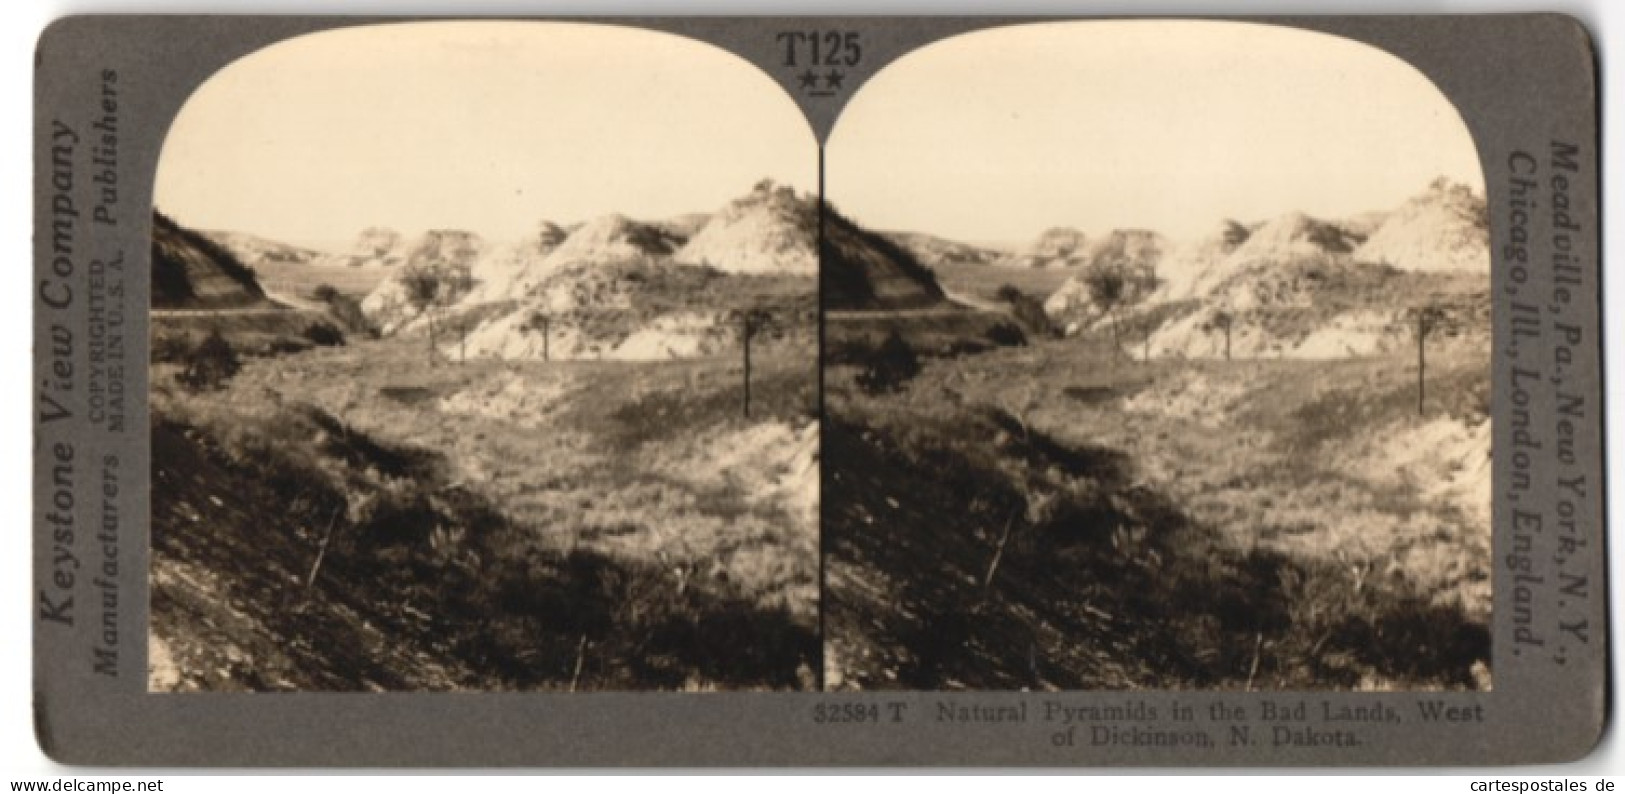 Stereo-Fotografie Keystone View Co., Meadville / PA., Ansicht Dickinson / ND, Natural Pyramids In The Bad Lands  - Stereoscopio